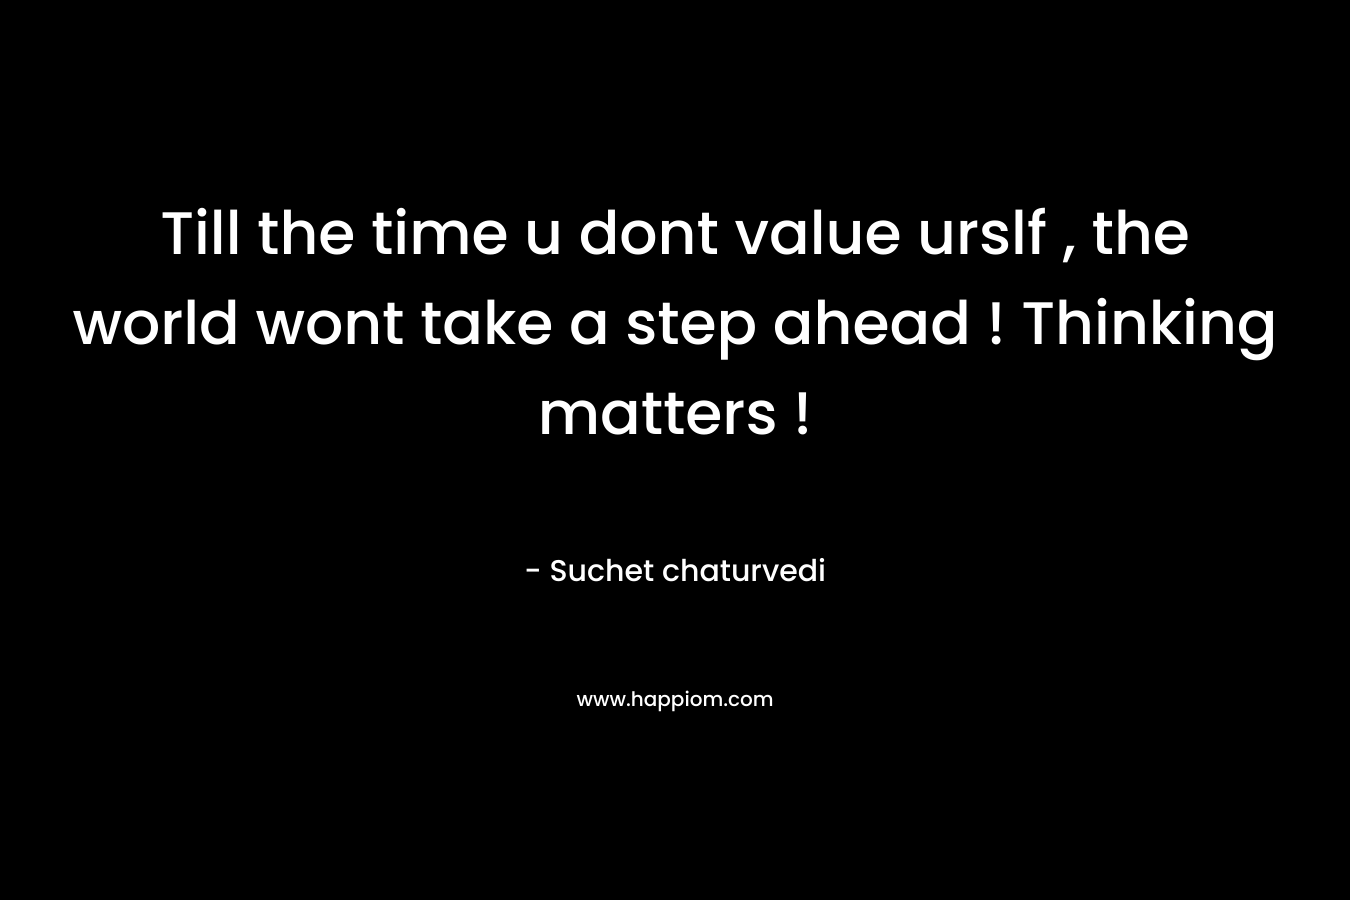 Till the time u dont value urslf , the world wont take a step ahead ! Thinking matters !